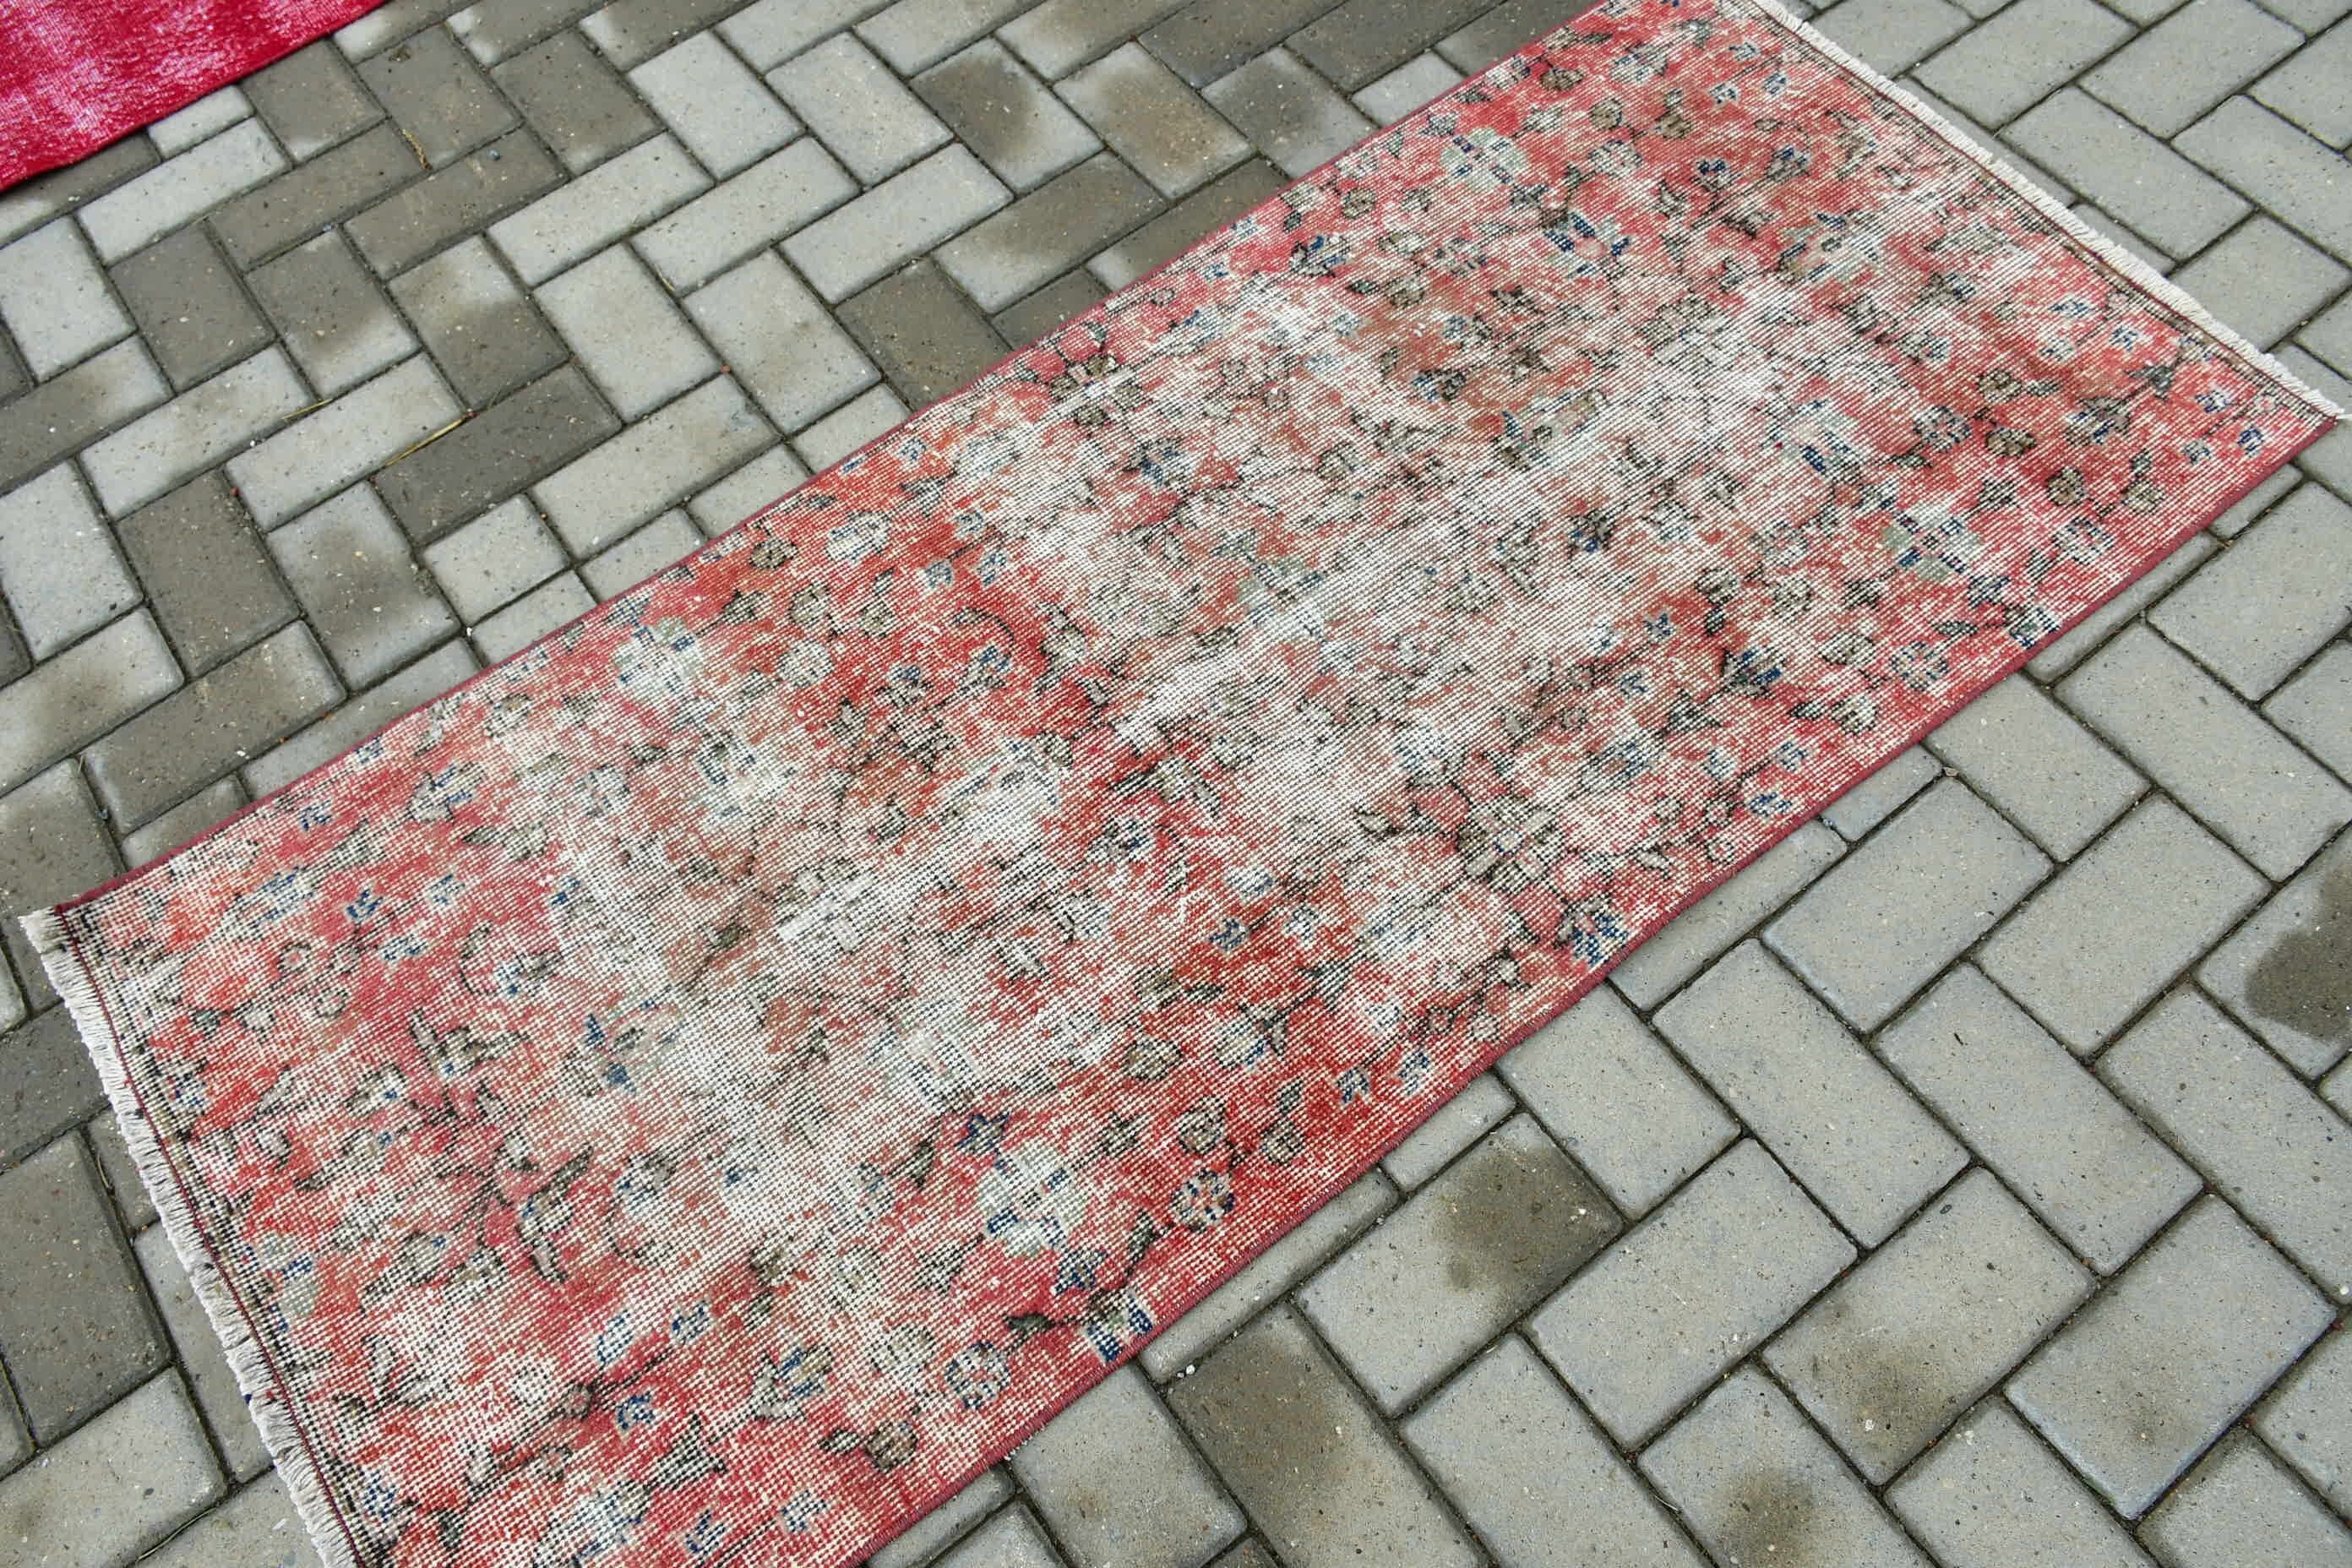 Wool Rug, Rugs for Wall Hanging, Vintage Rug, Red Cool Rug, Turkish Rug, 2.4x5.3 ft Small Rug, Home Decor Rug, Entry Rugs, Door Mat Rug